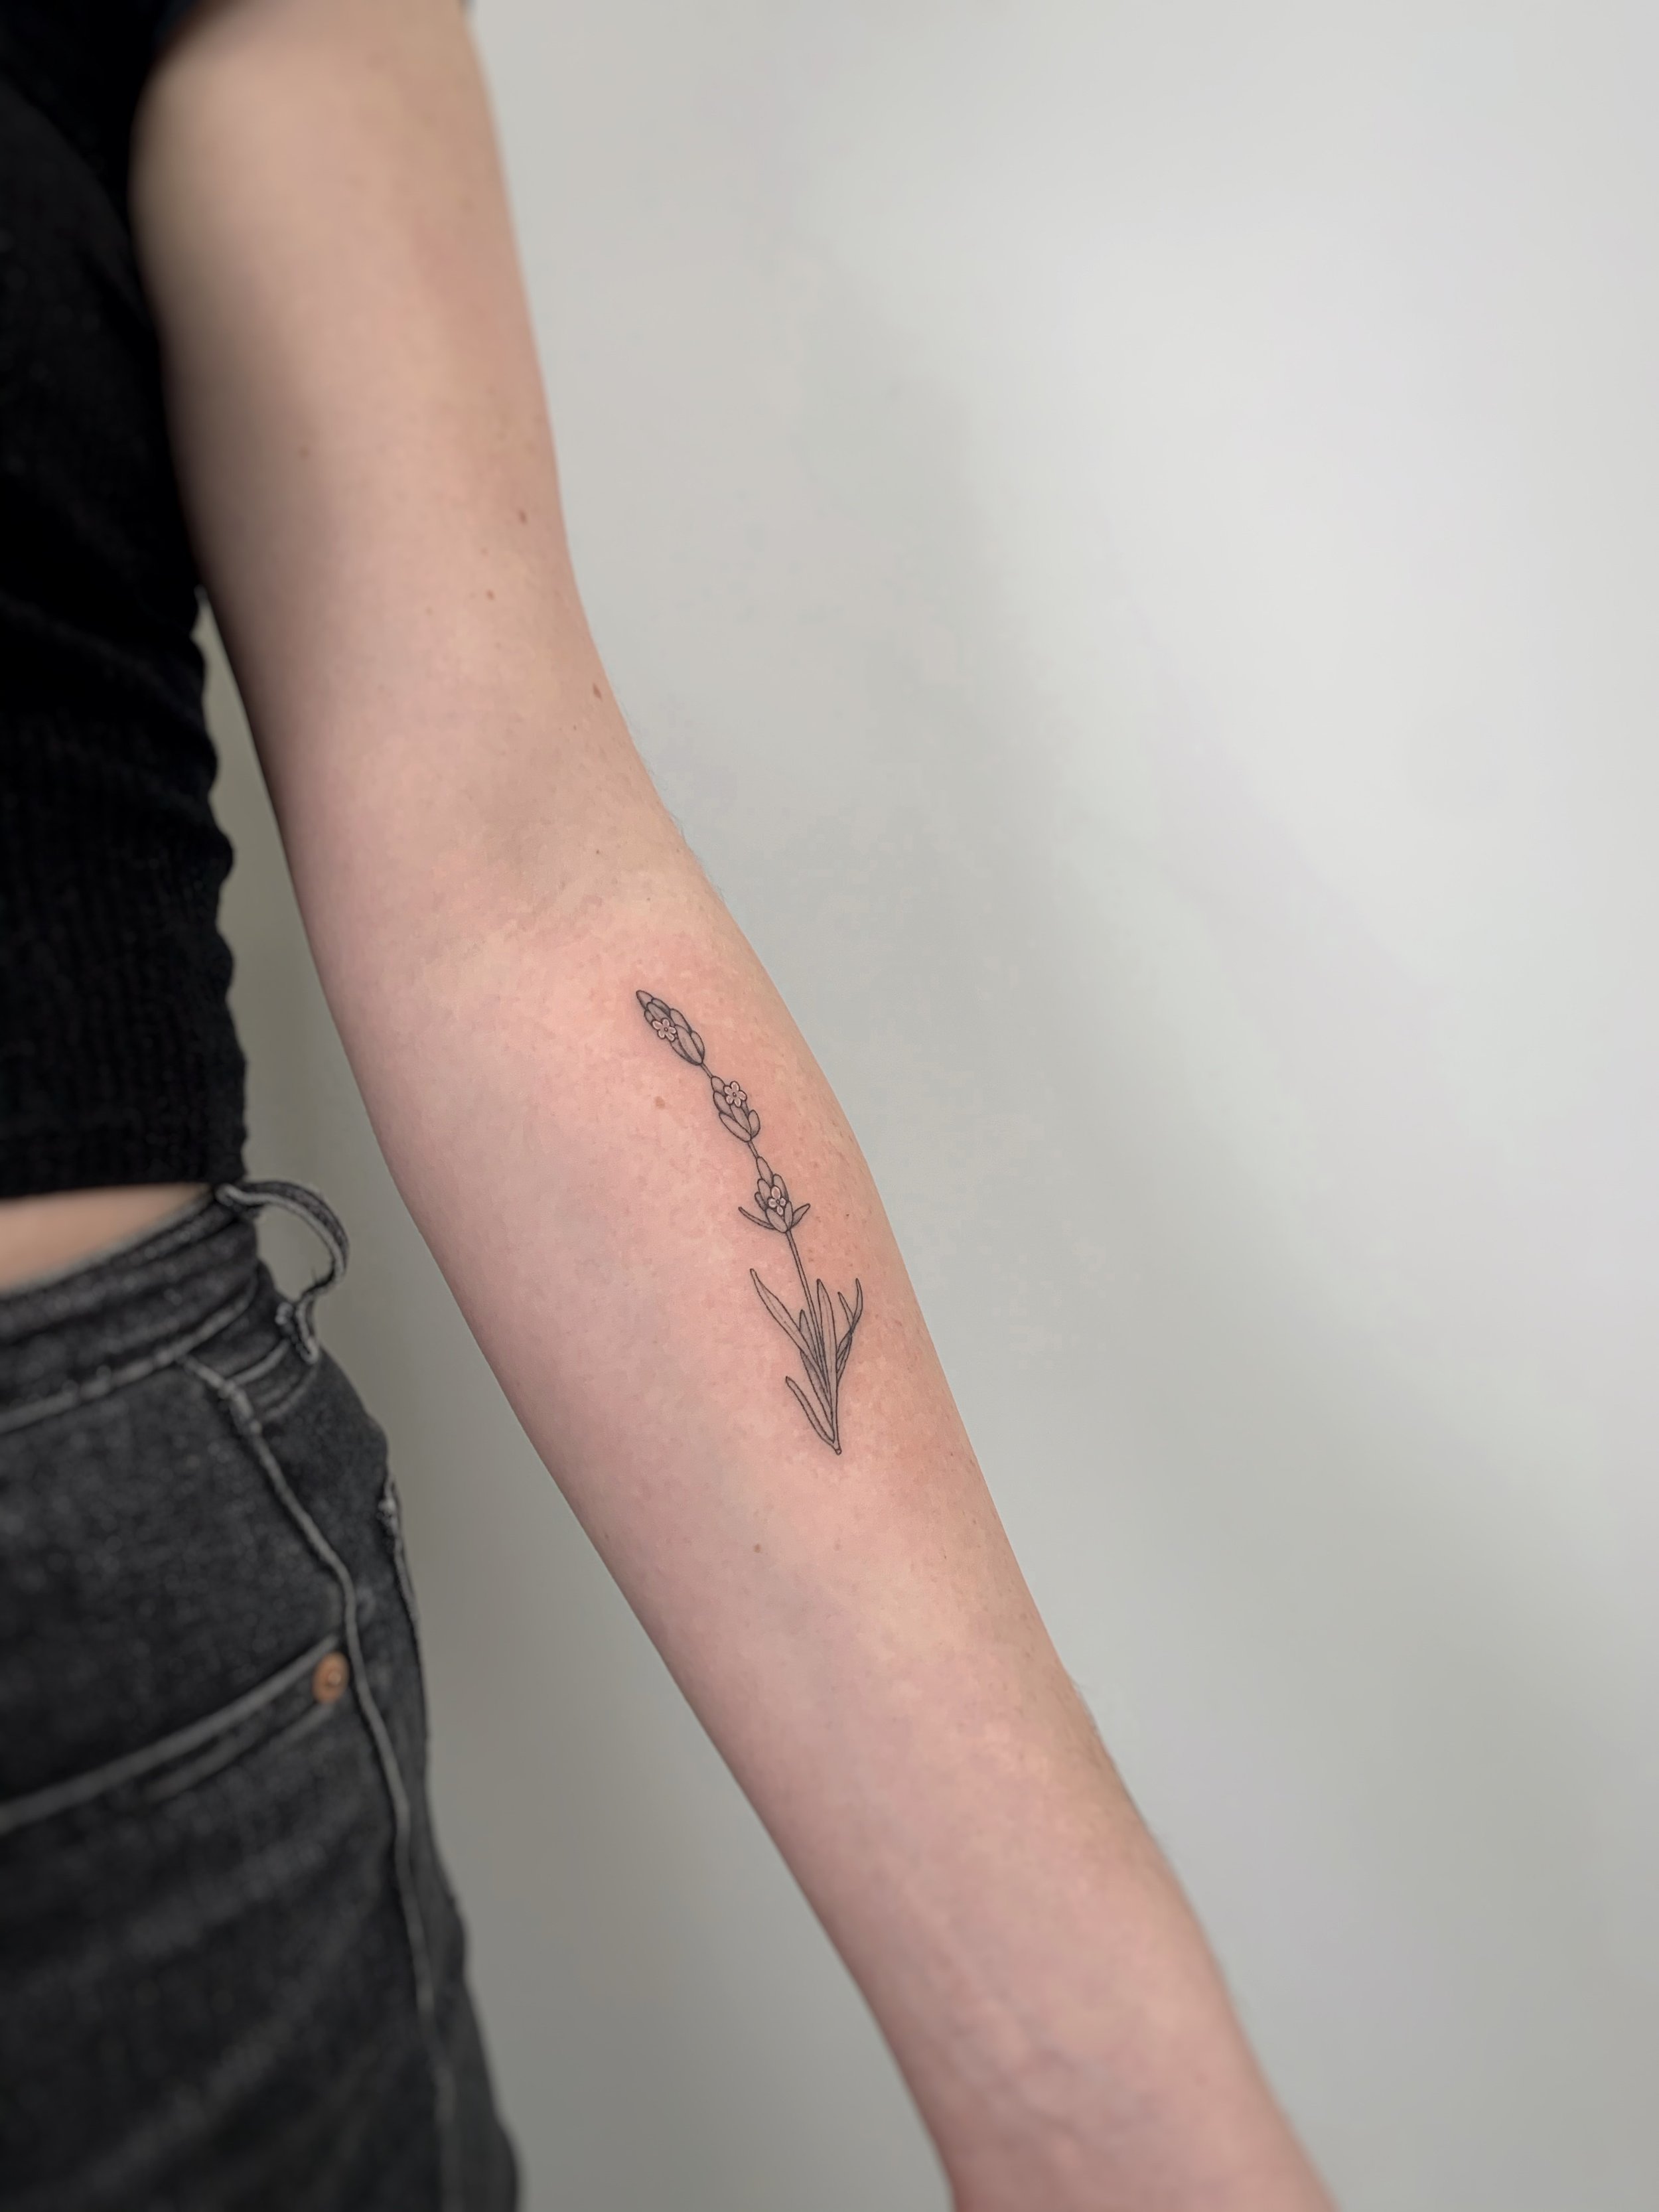 Simple Tattoos for Girls Who Don't Want Anything Too Intense ...